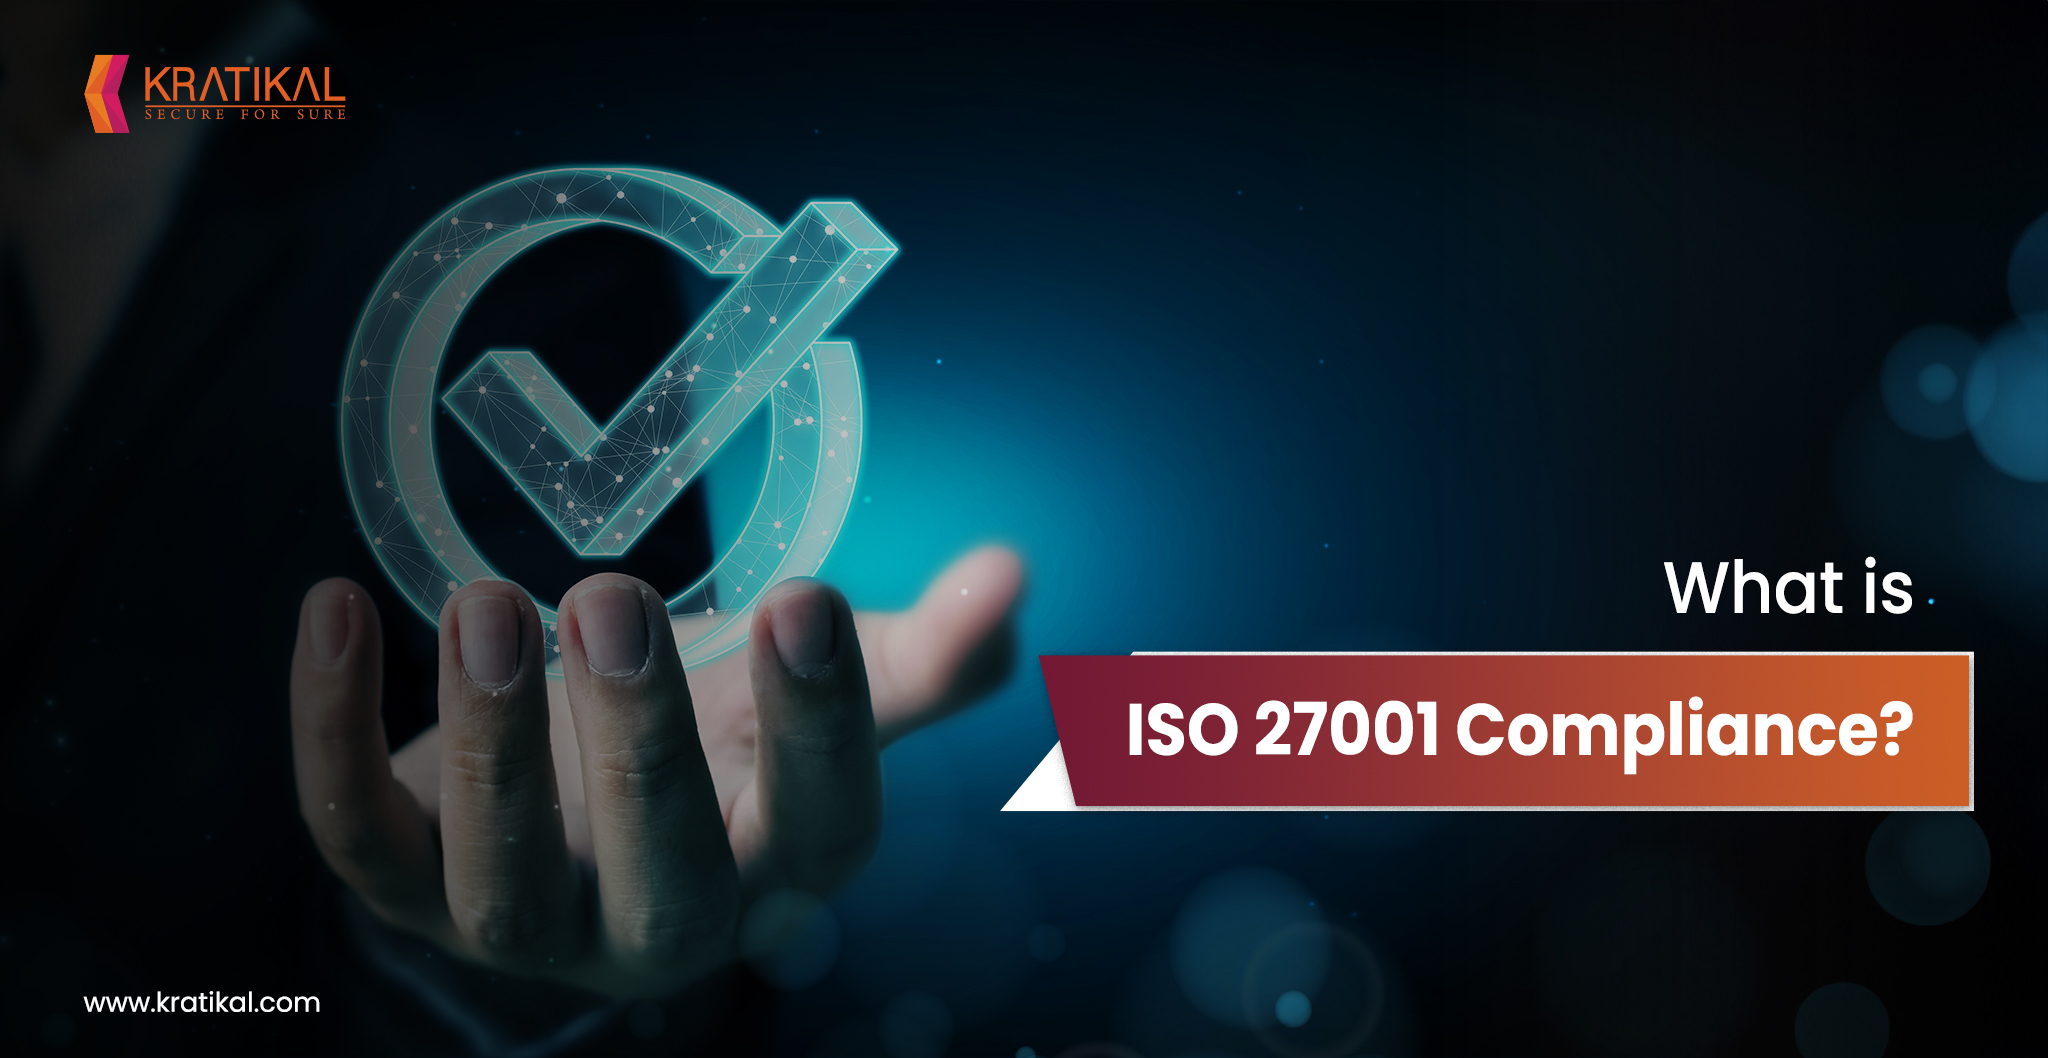 What is ISO 27001 Compliance?